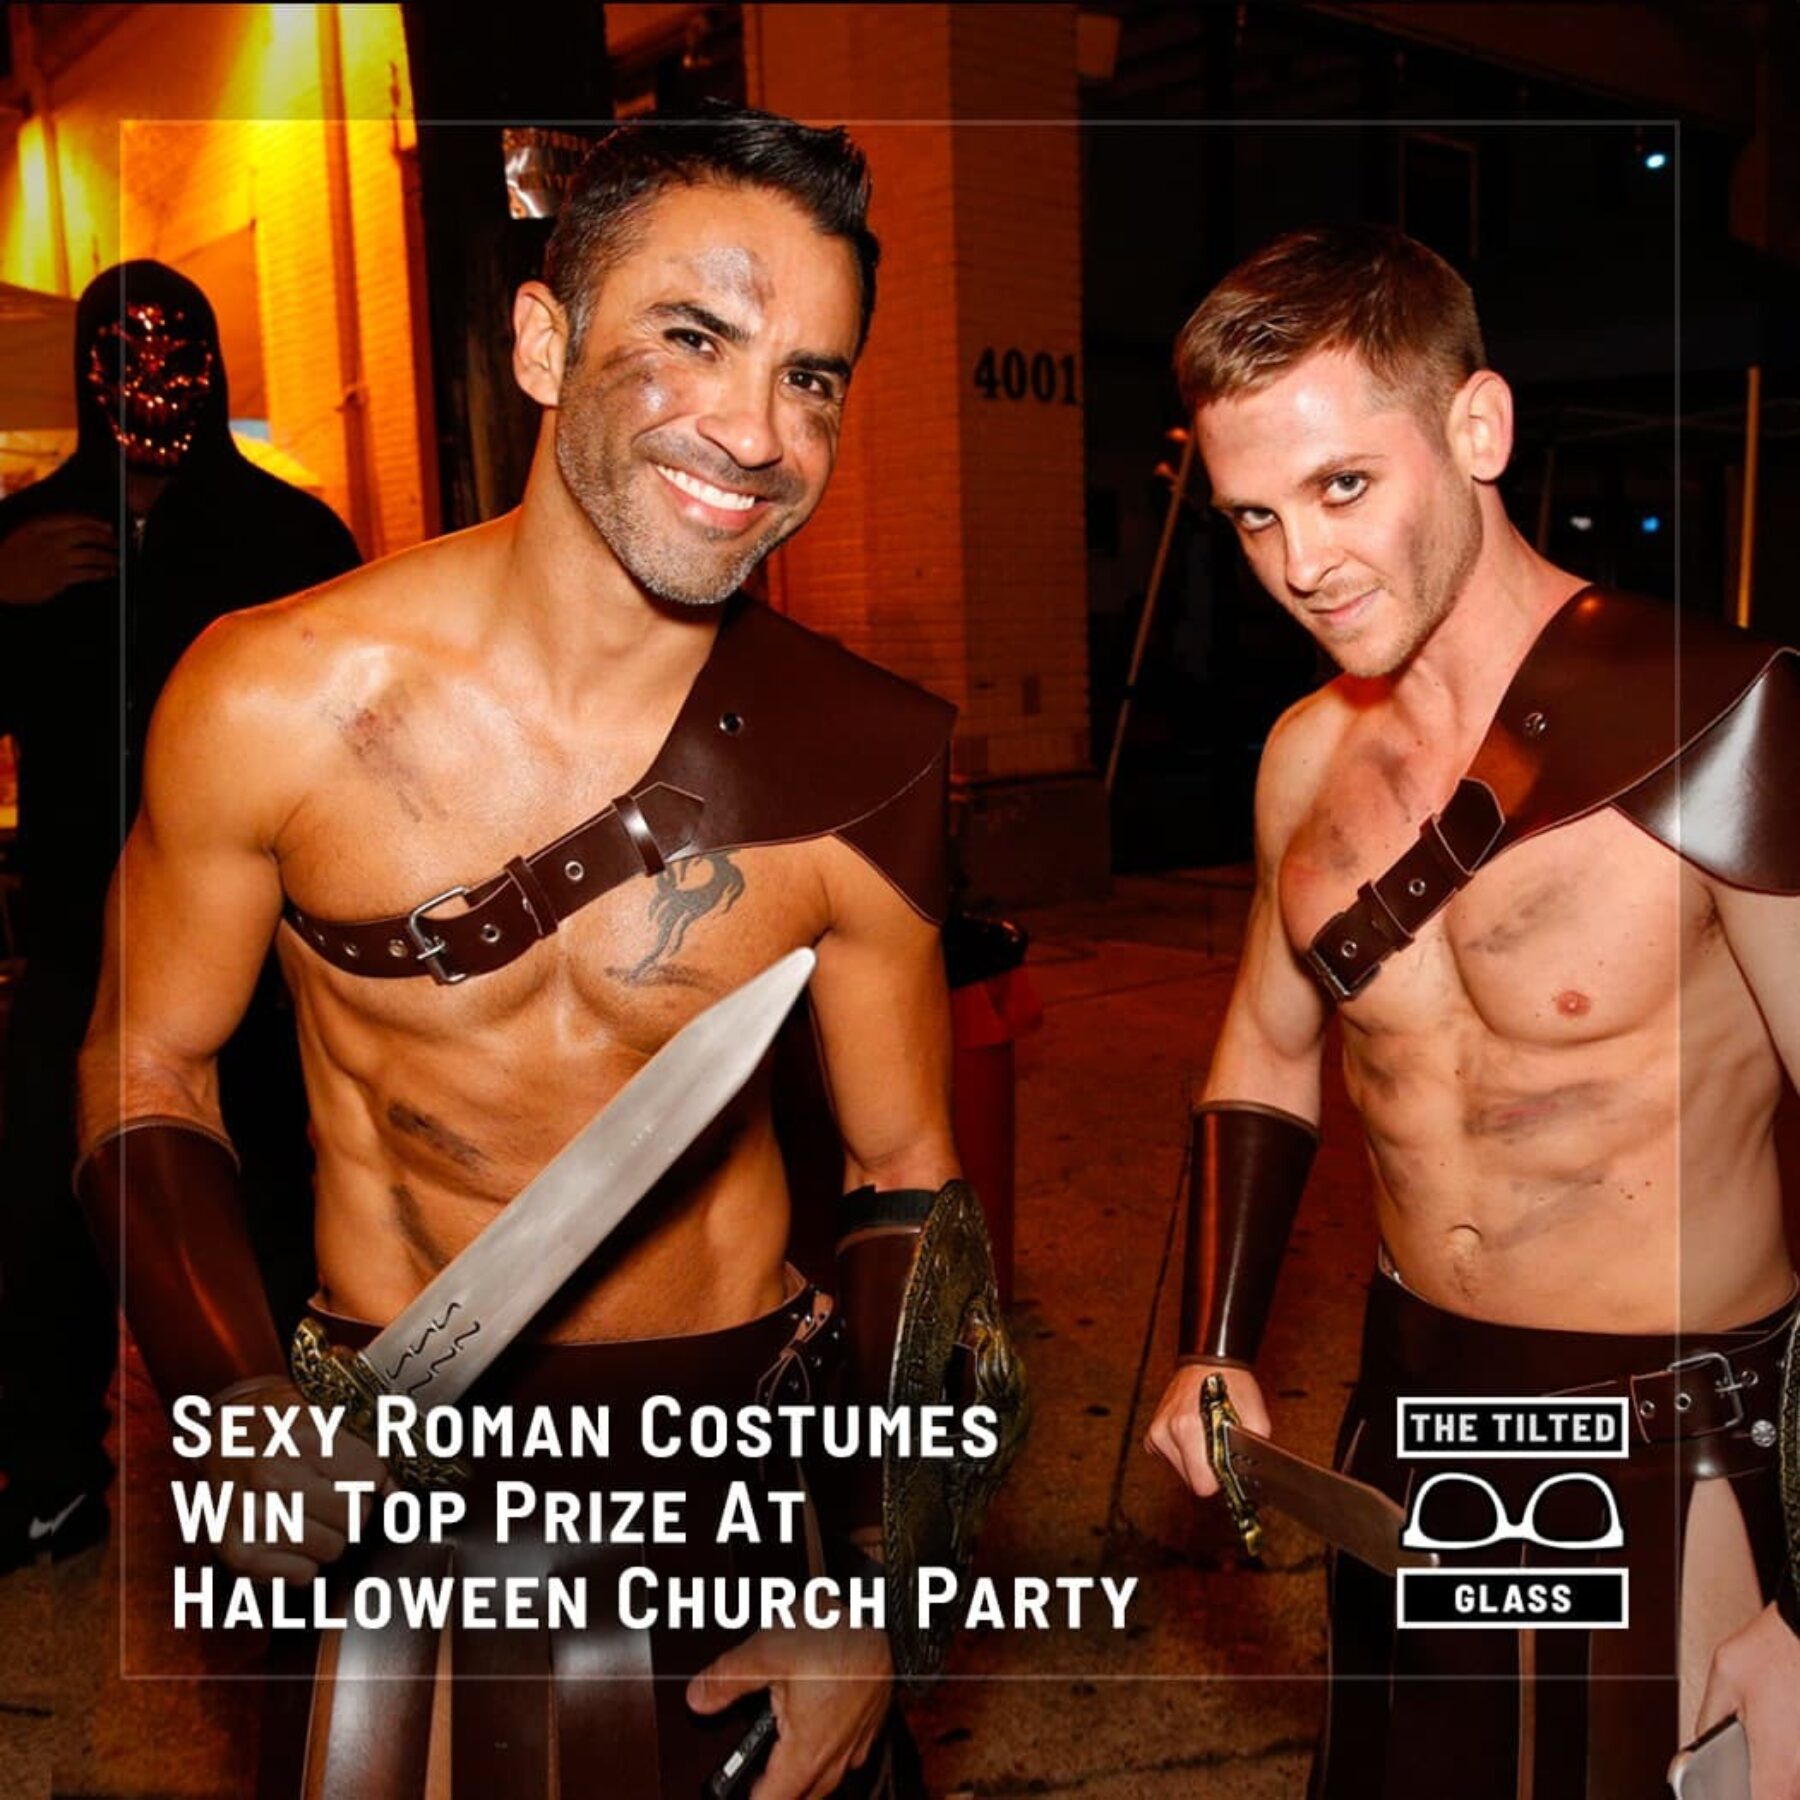 Sexy Roman Costumes Win Top Prize At Halloween Church Party